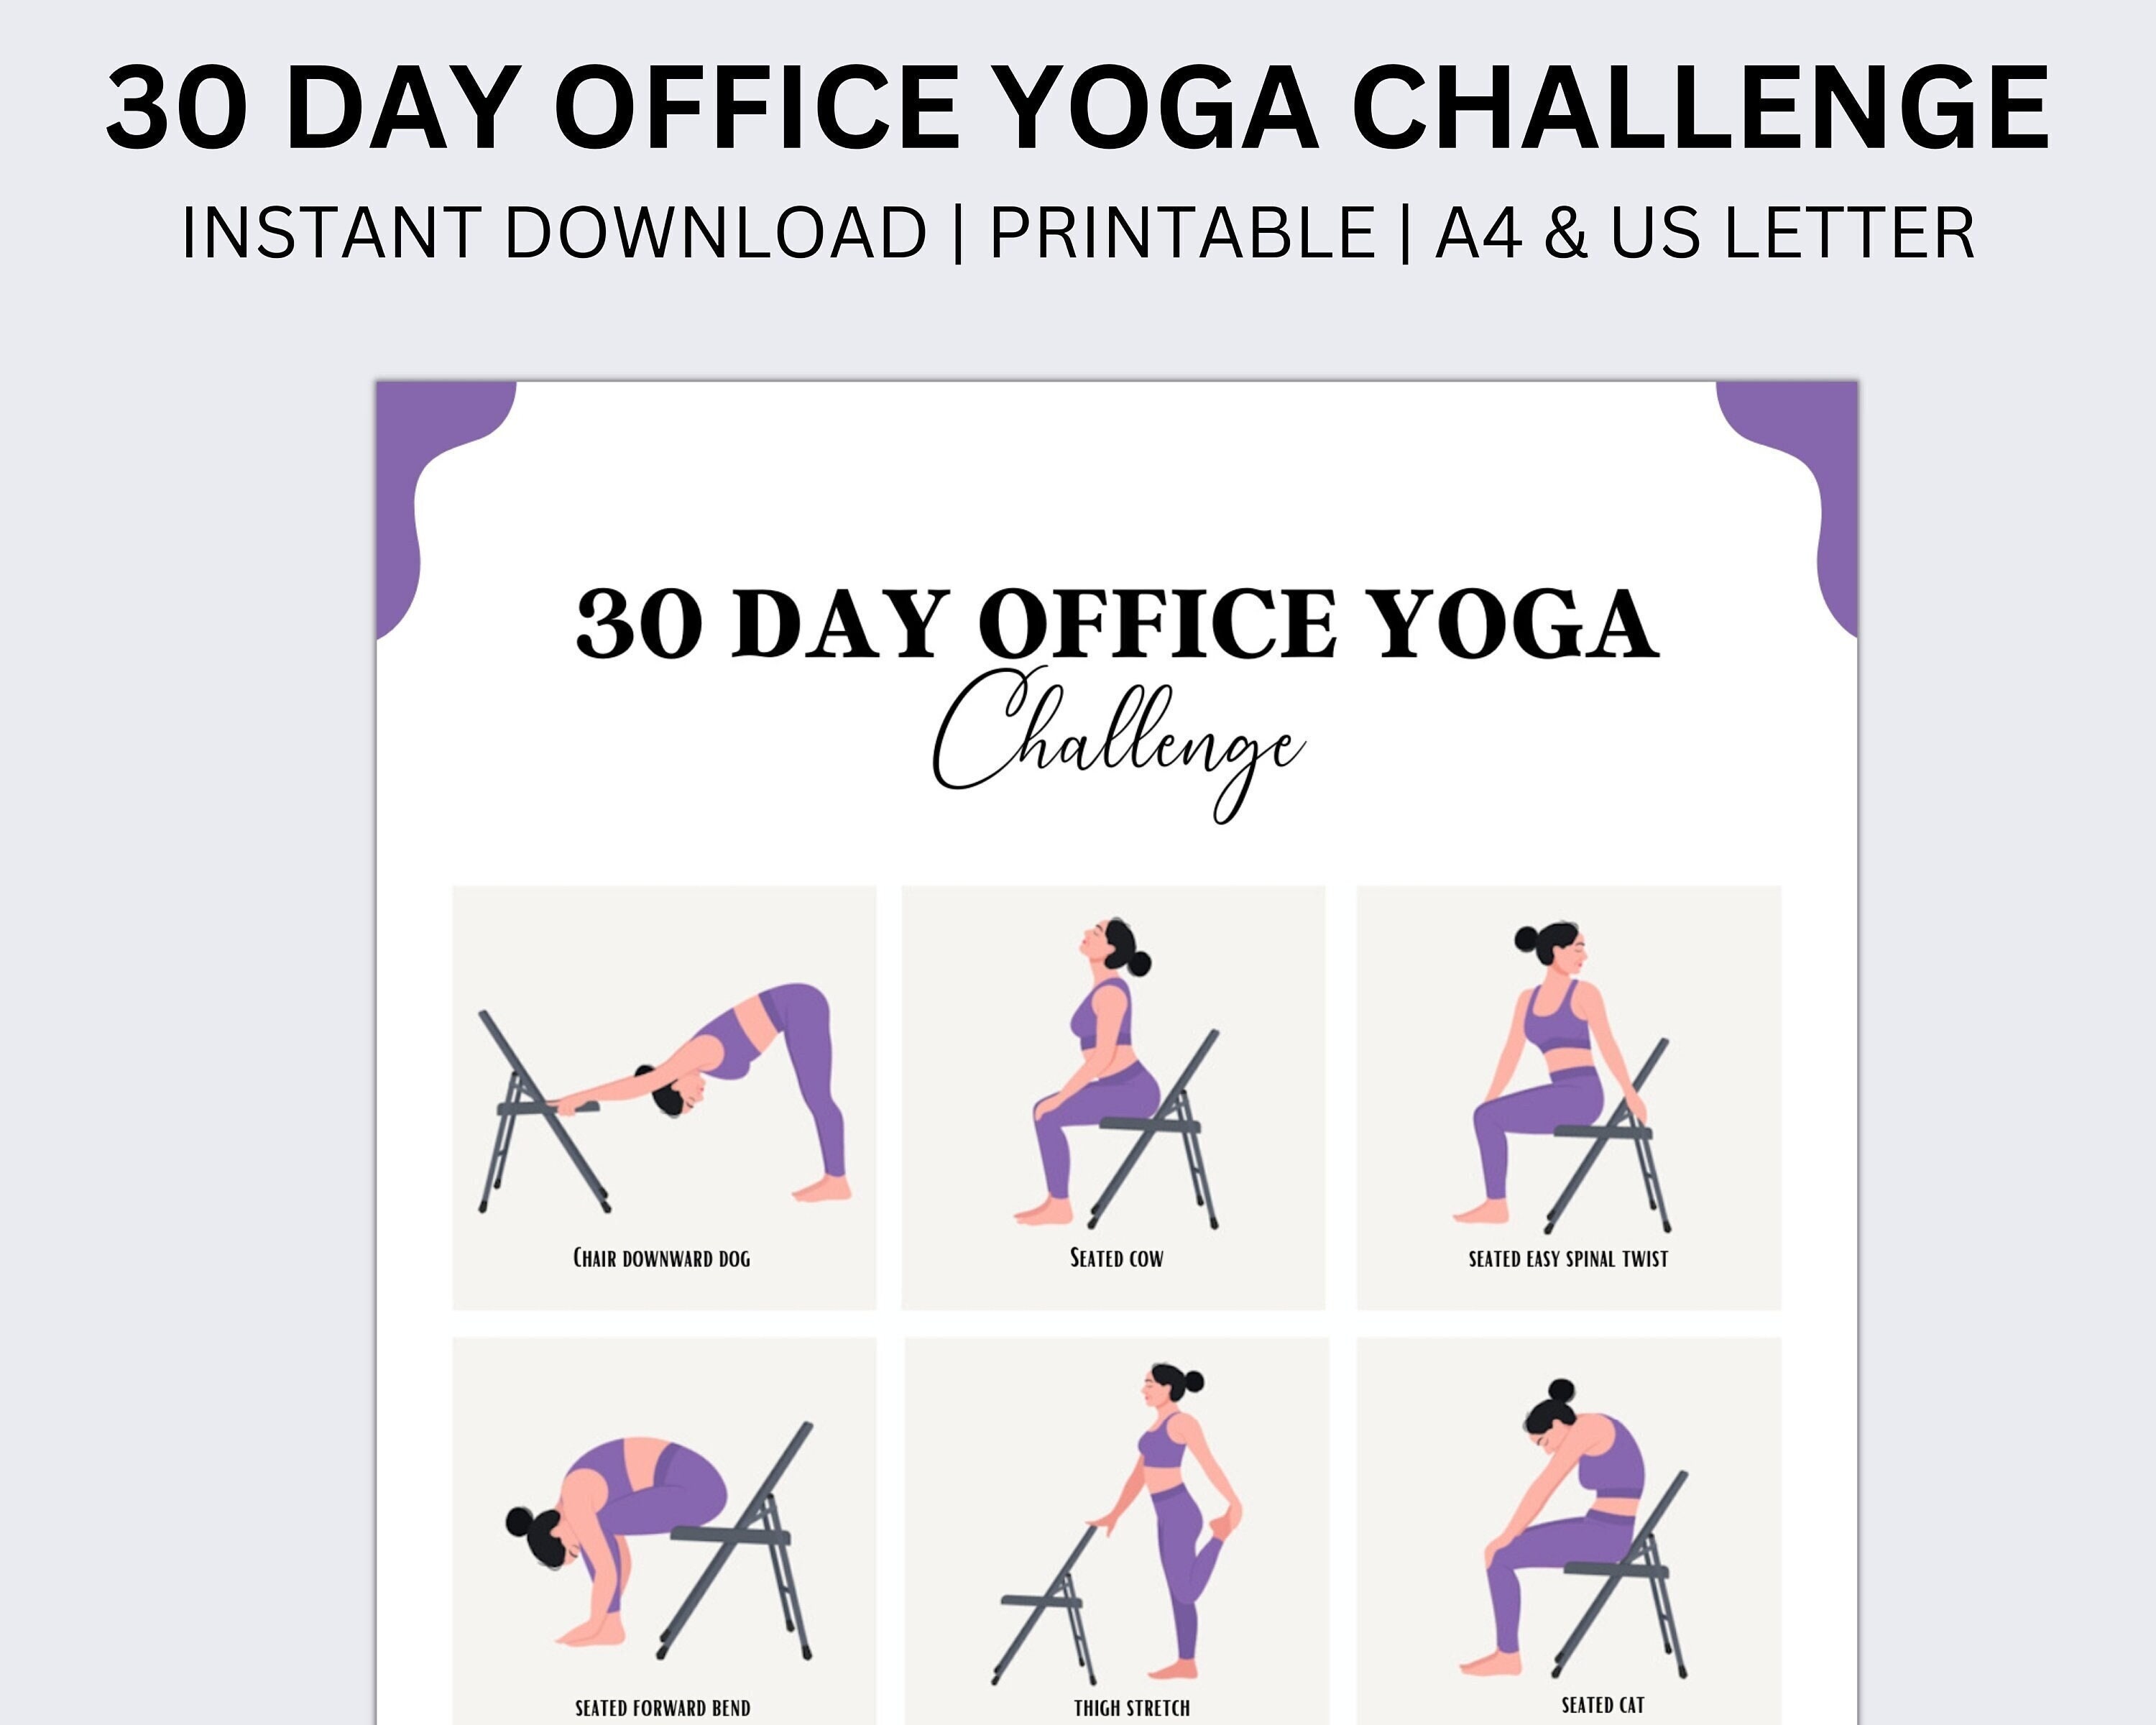 Challenging Yoga Poses: A Hilarious Attempt with Unexpected Twists